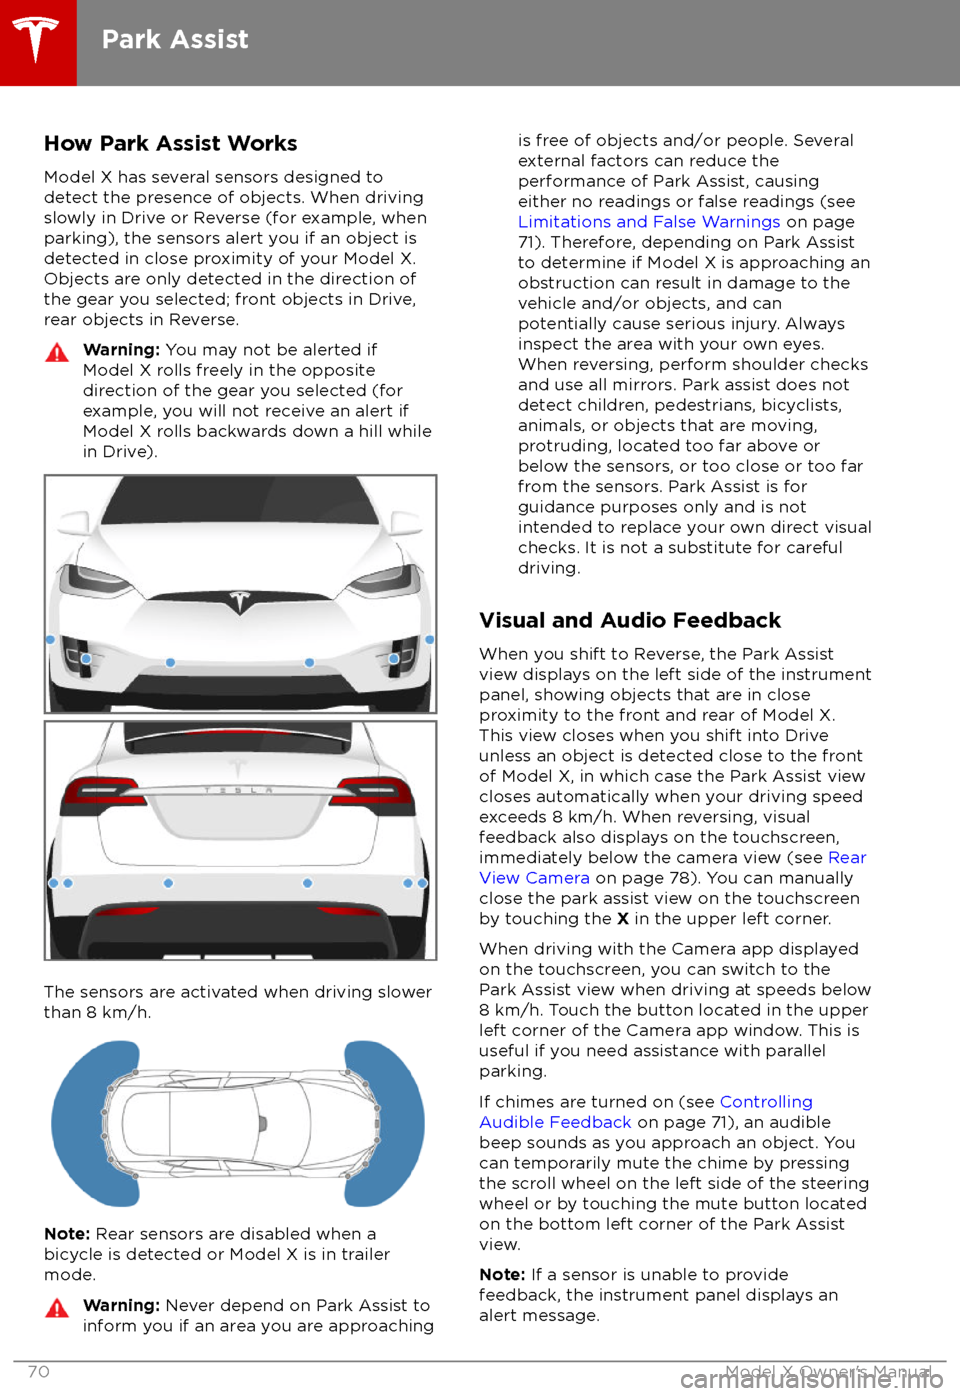 TESLA MODEL X 2018  Owners Manual  How Park Assist WorksModel X has several sensors designed to
detect the presence of objects. When driving slowly in Drive or Reverse (for example, when
parking), the sensors alert you if an object is
